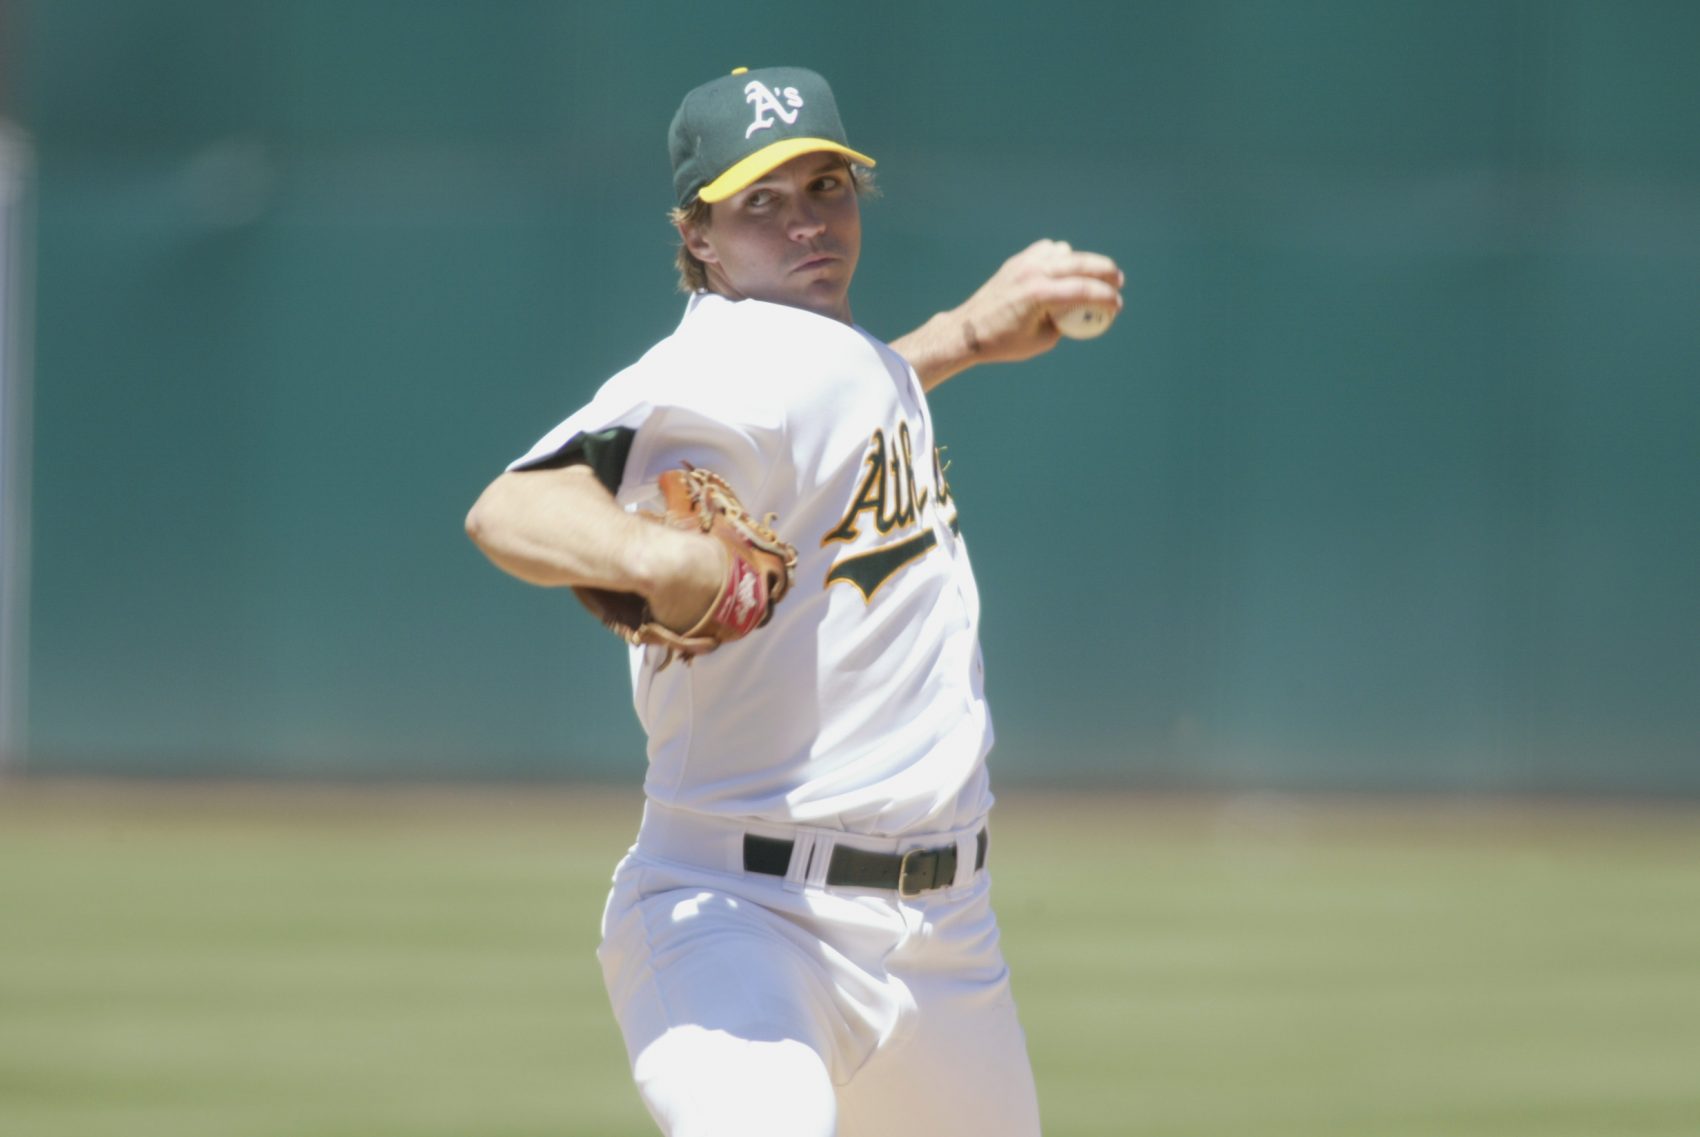 Former major league pitcher Barry Zito finds second career in